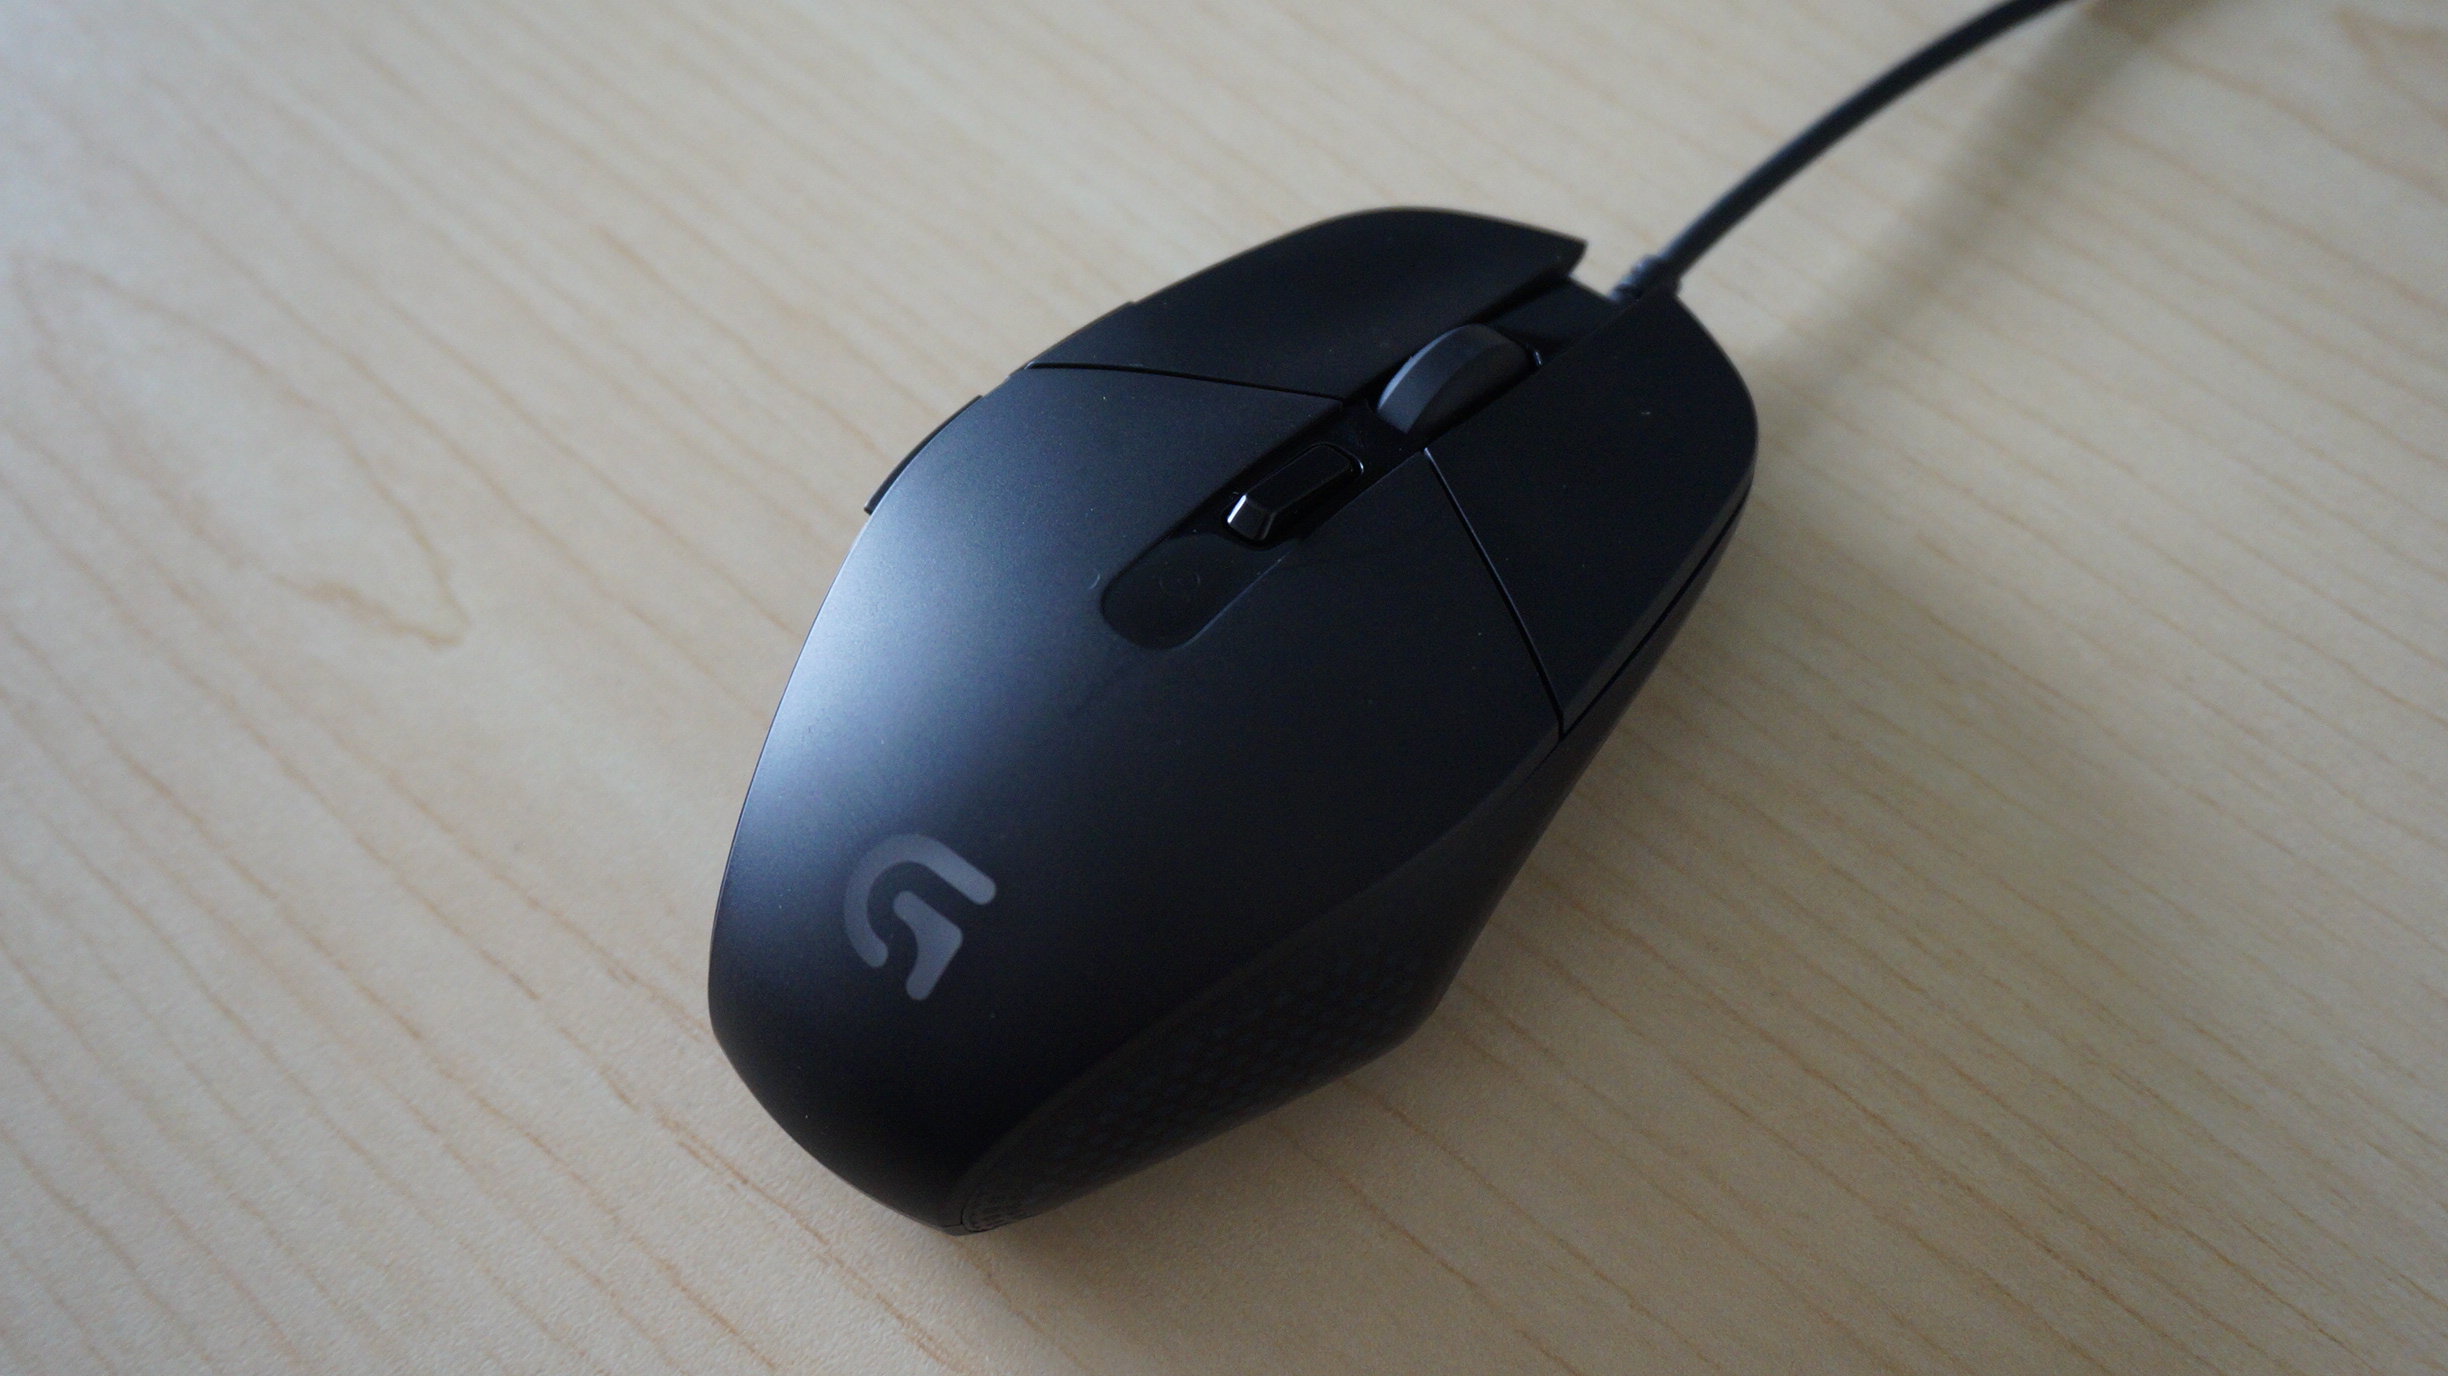 Logitech G302 Daedalus Prime gaming mouse review